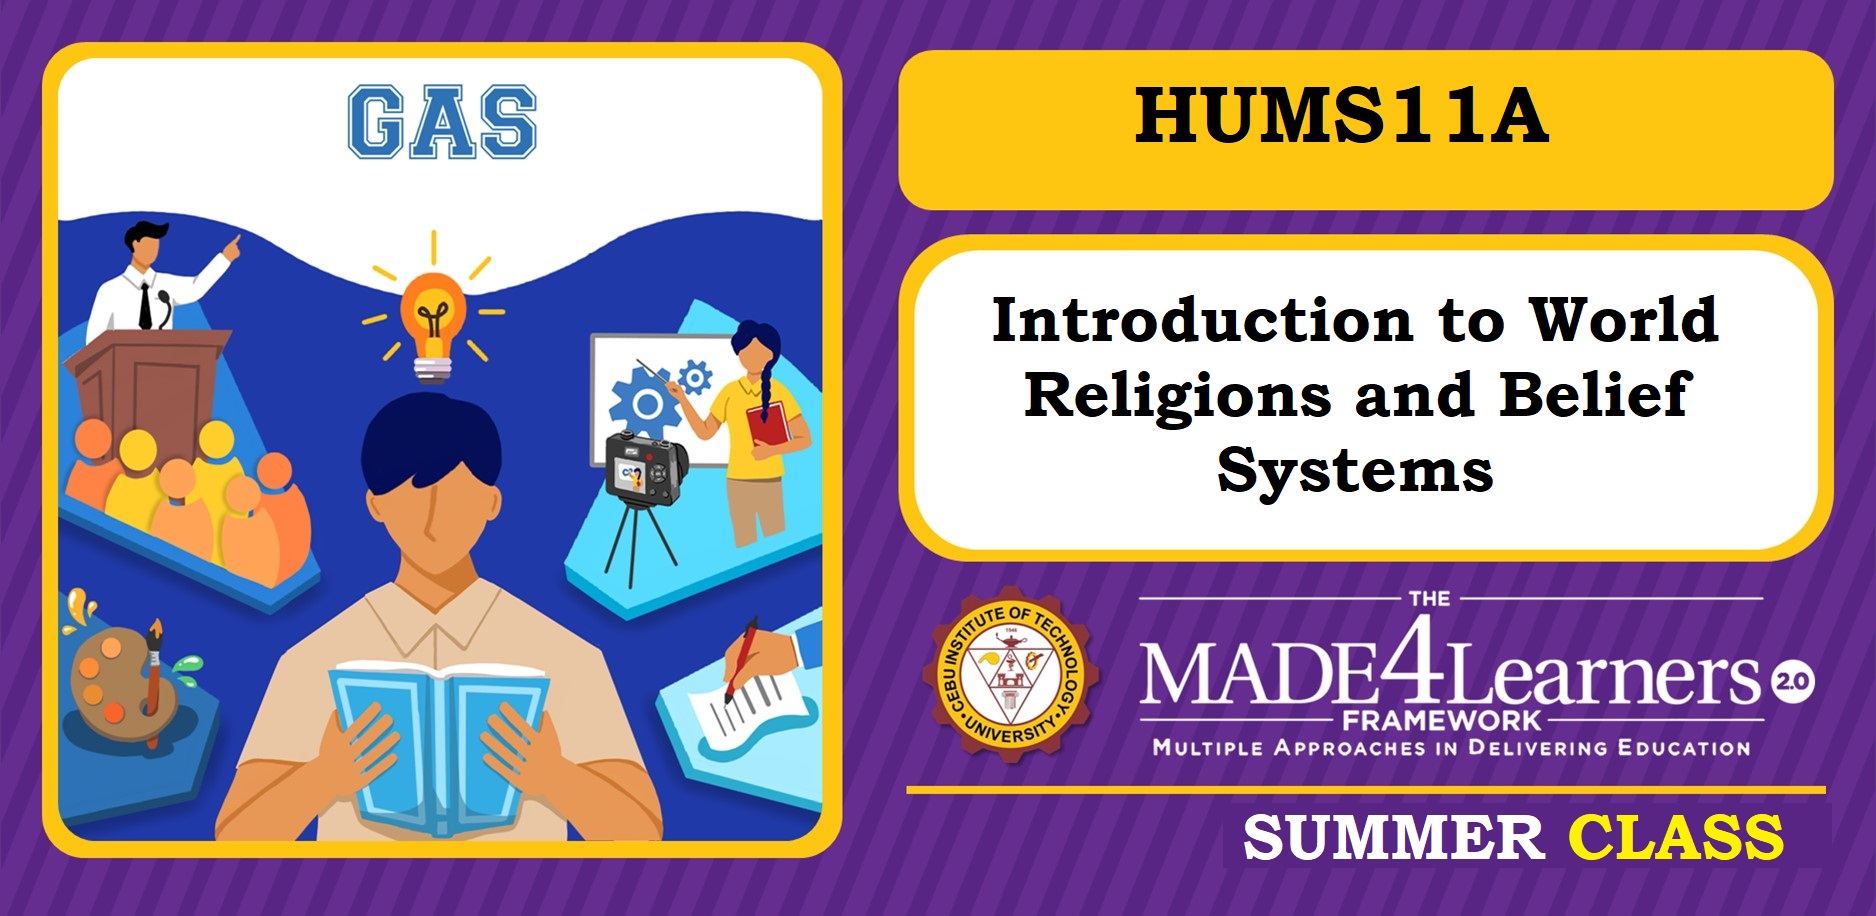 HUMS11A: Introduction to World Religions and Belief Systems (Arceo)